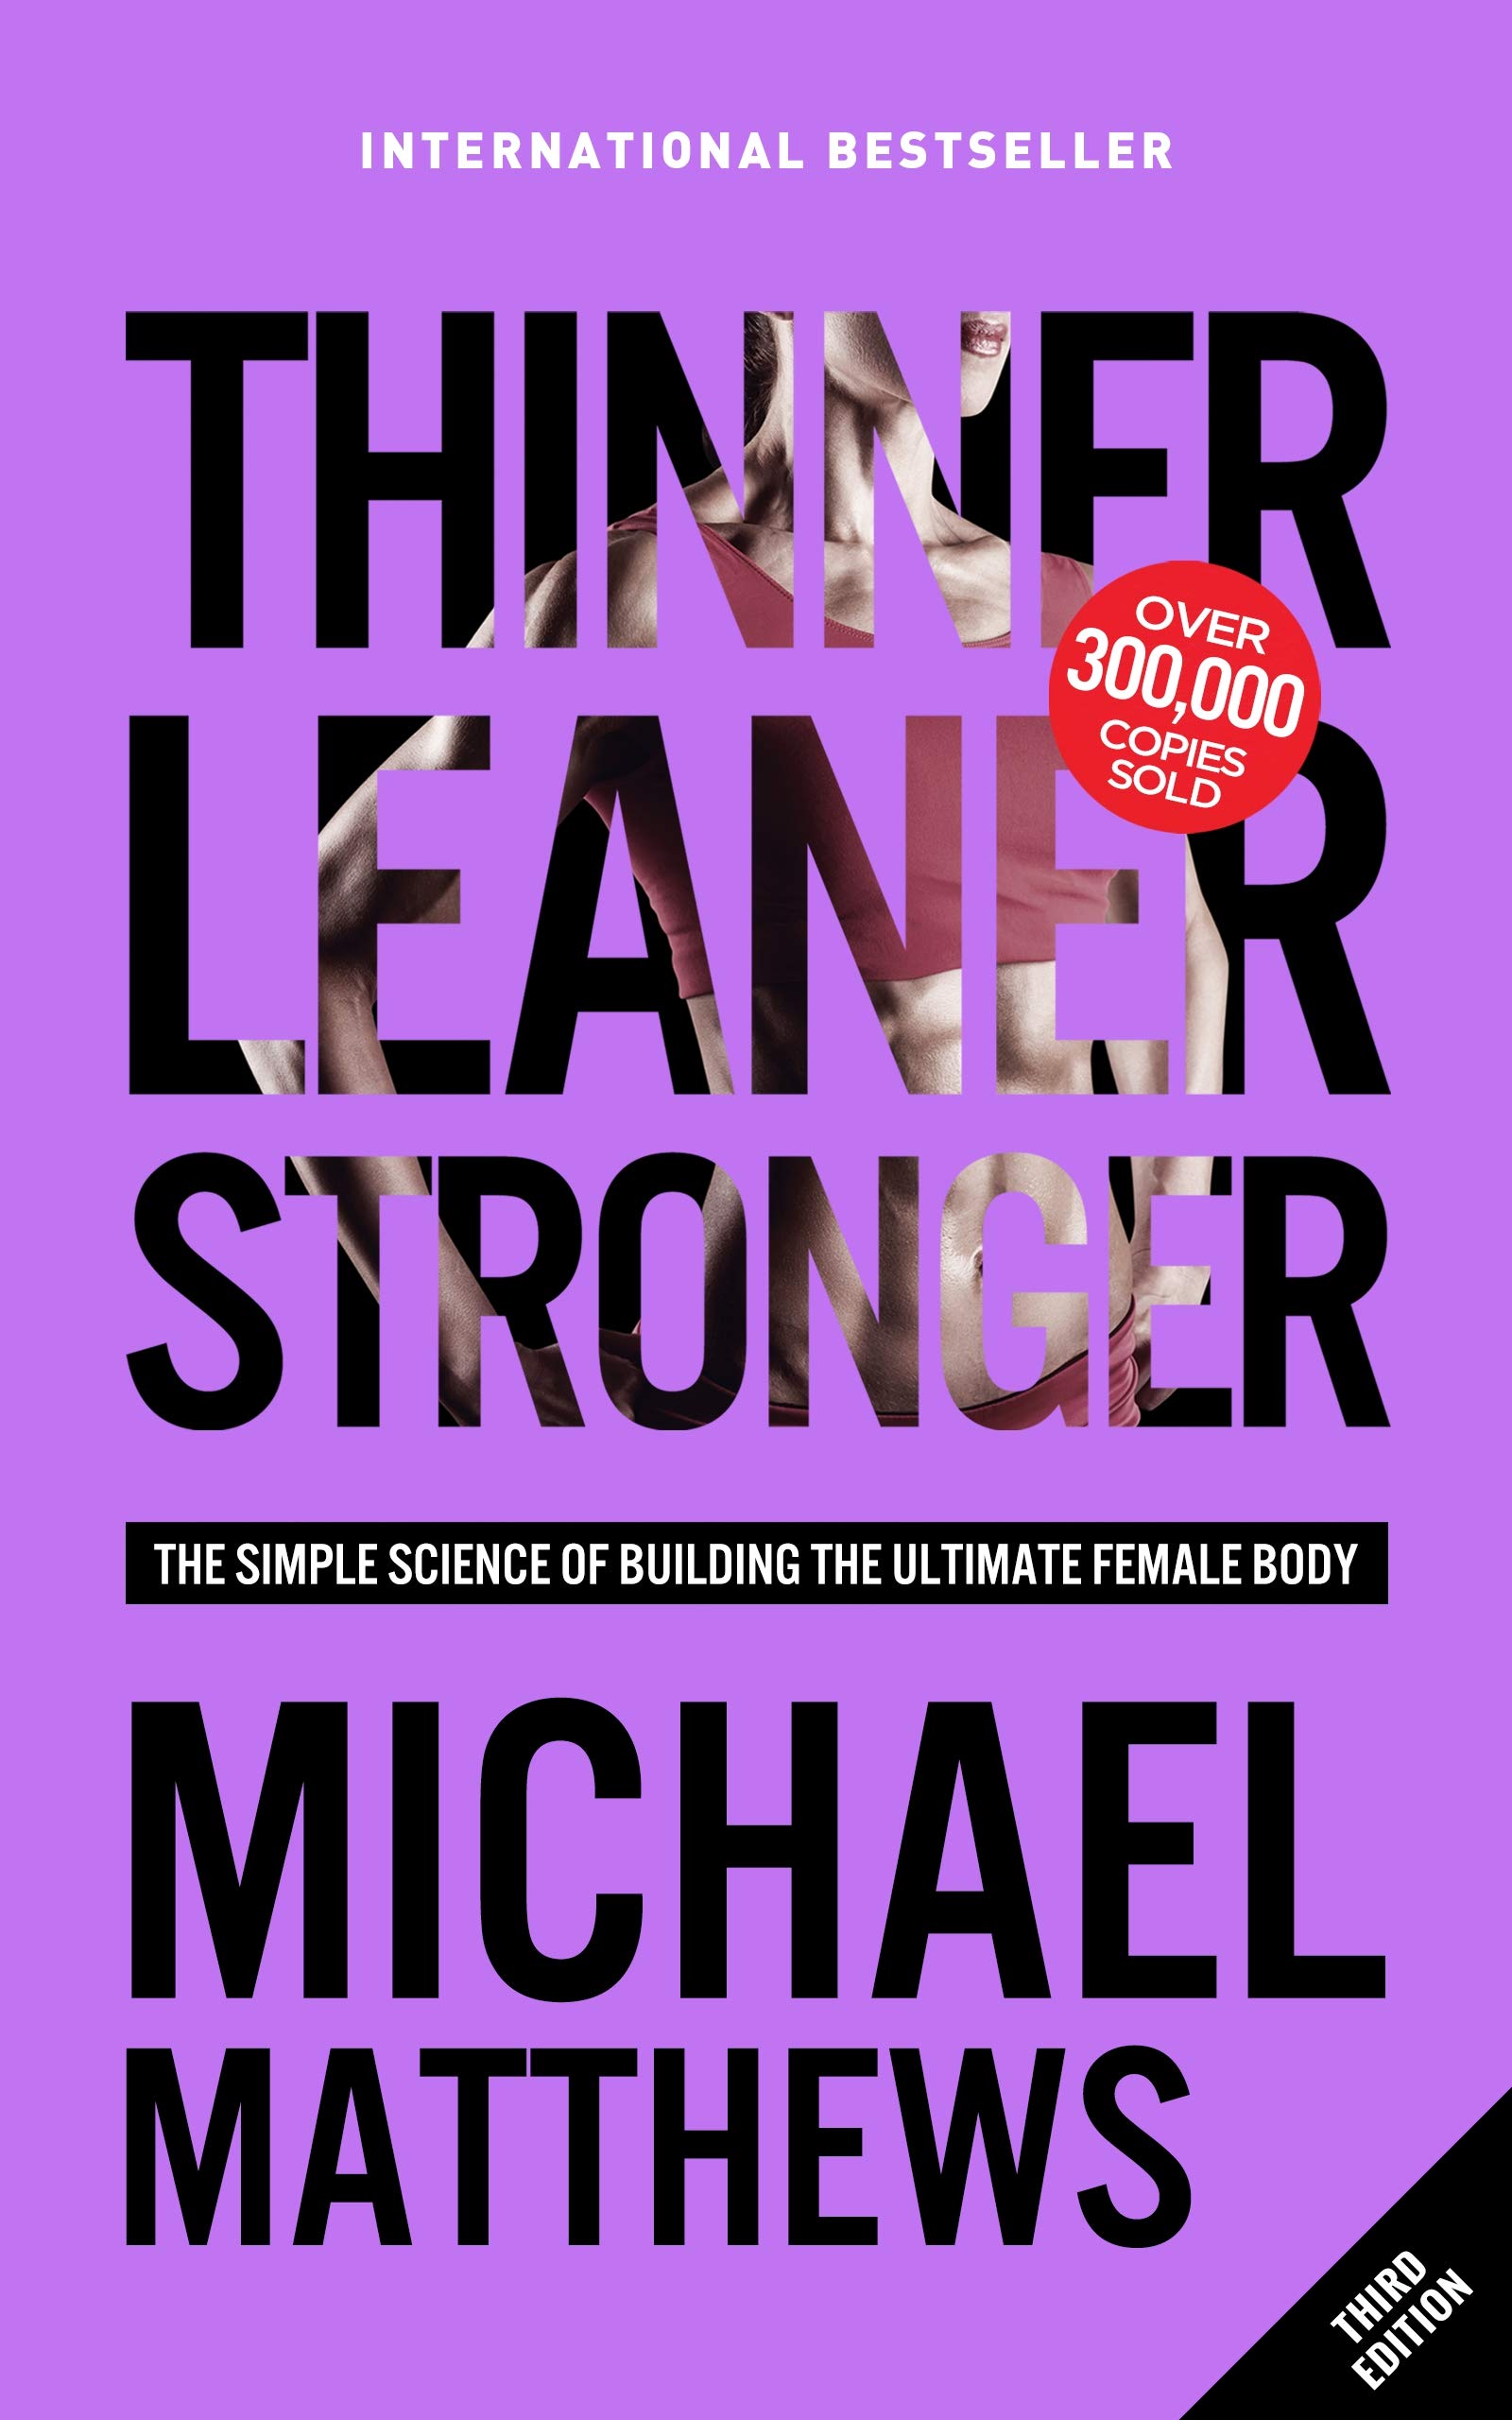 Thinner Leaner Stronger: The Simple Science of Building the Ultimate Female Body (The Thinner Leaner Stronger Series Book 1)